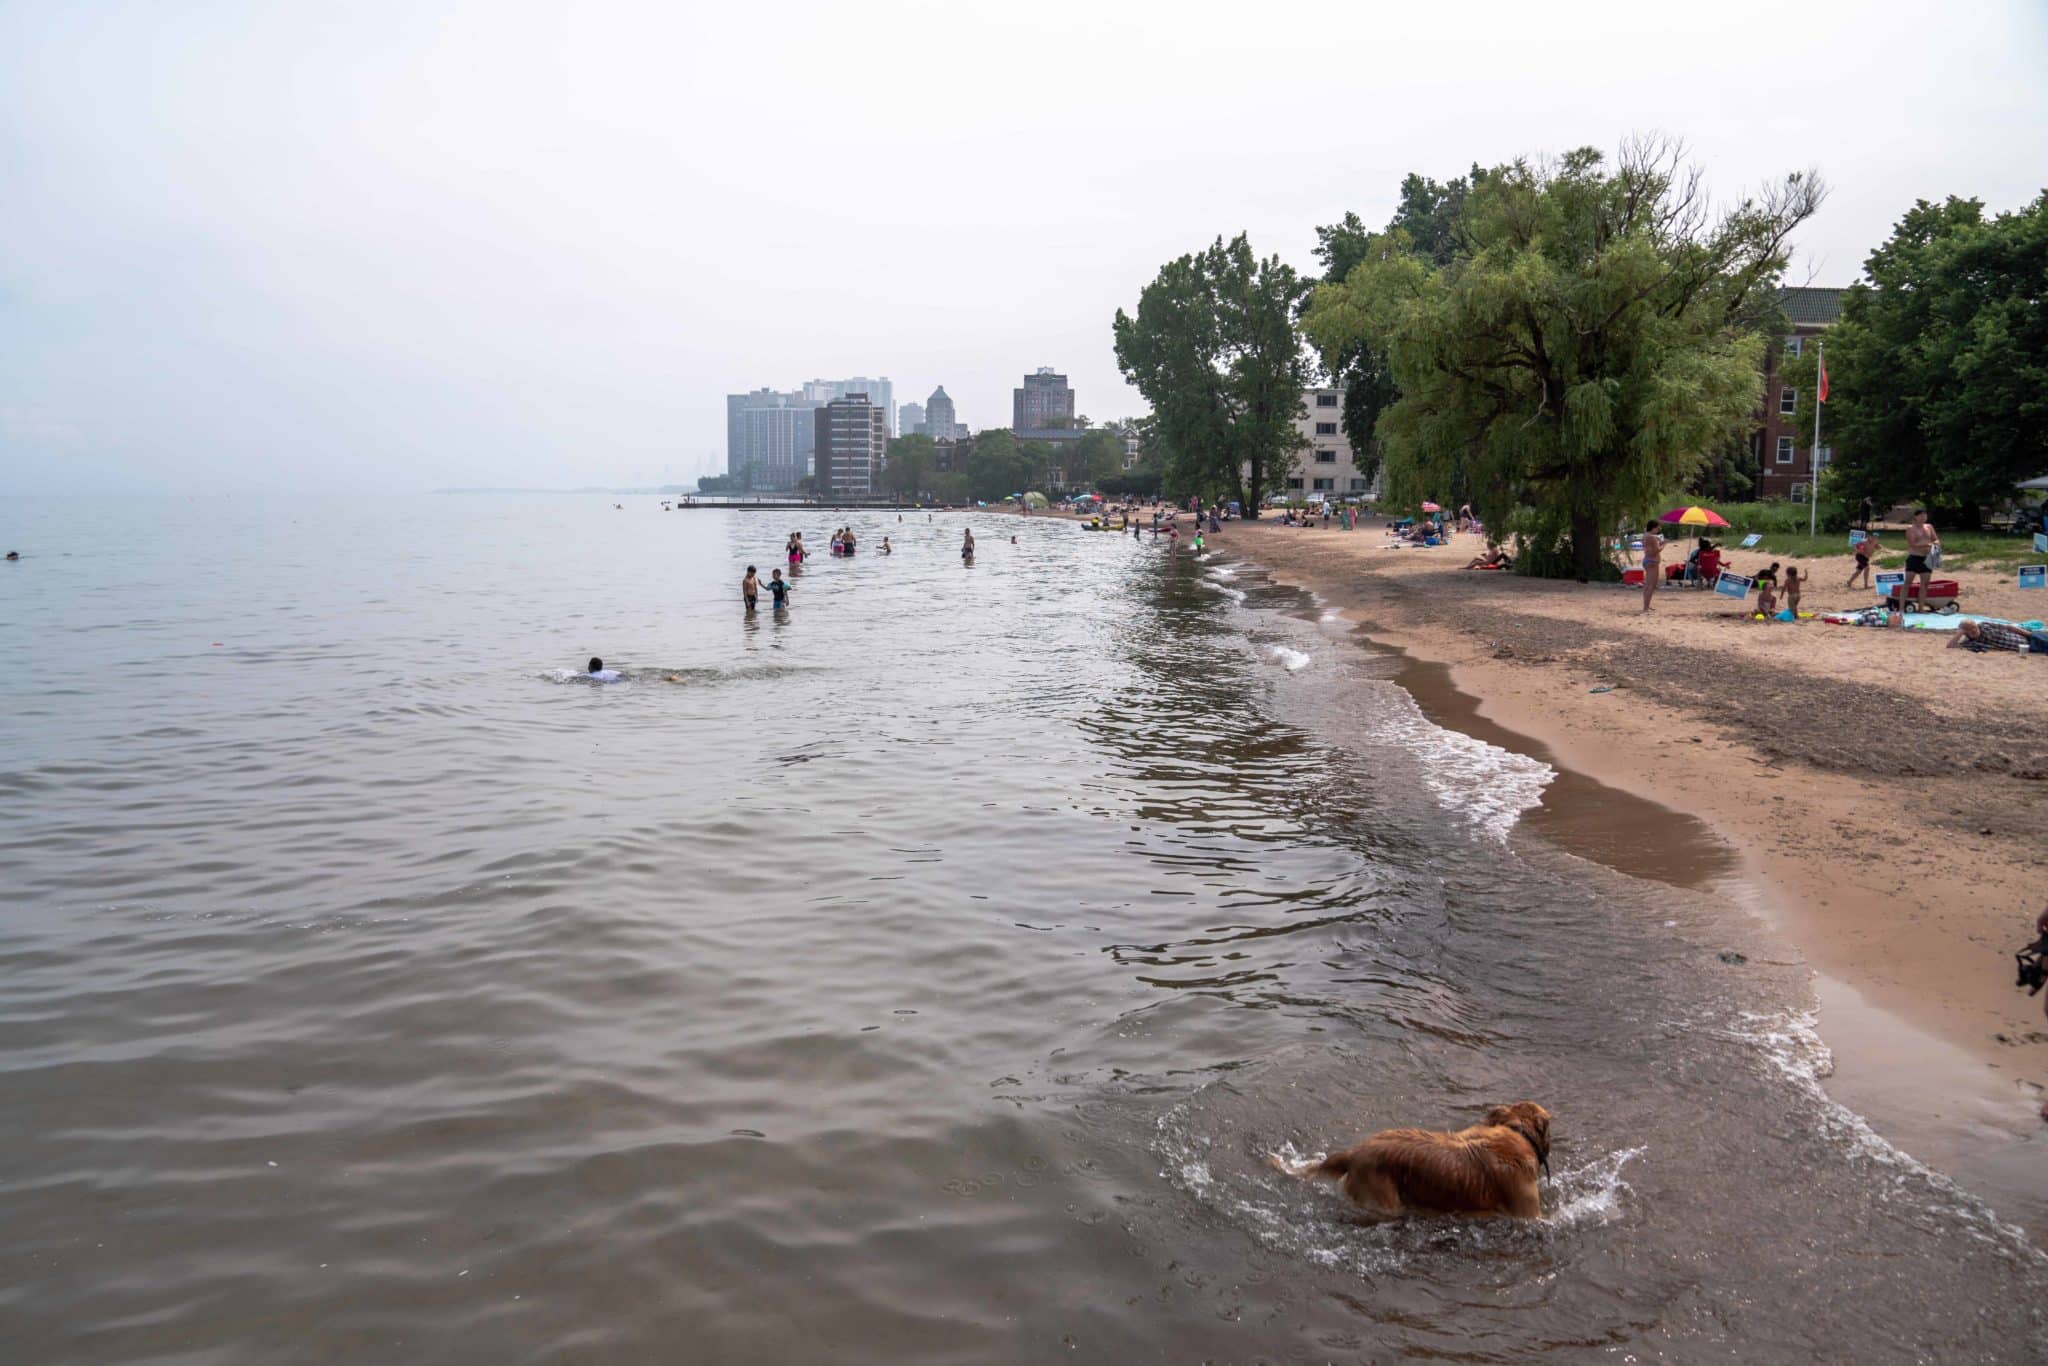 Despite beaches and waterfront access still closed in Chicago due to the COVID-19 coronavirus pandemic outbreak, people still flocked to the lake at Loyola beach.